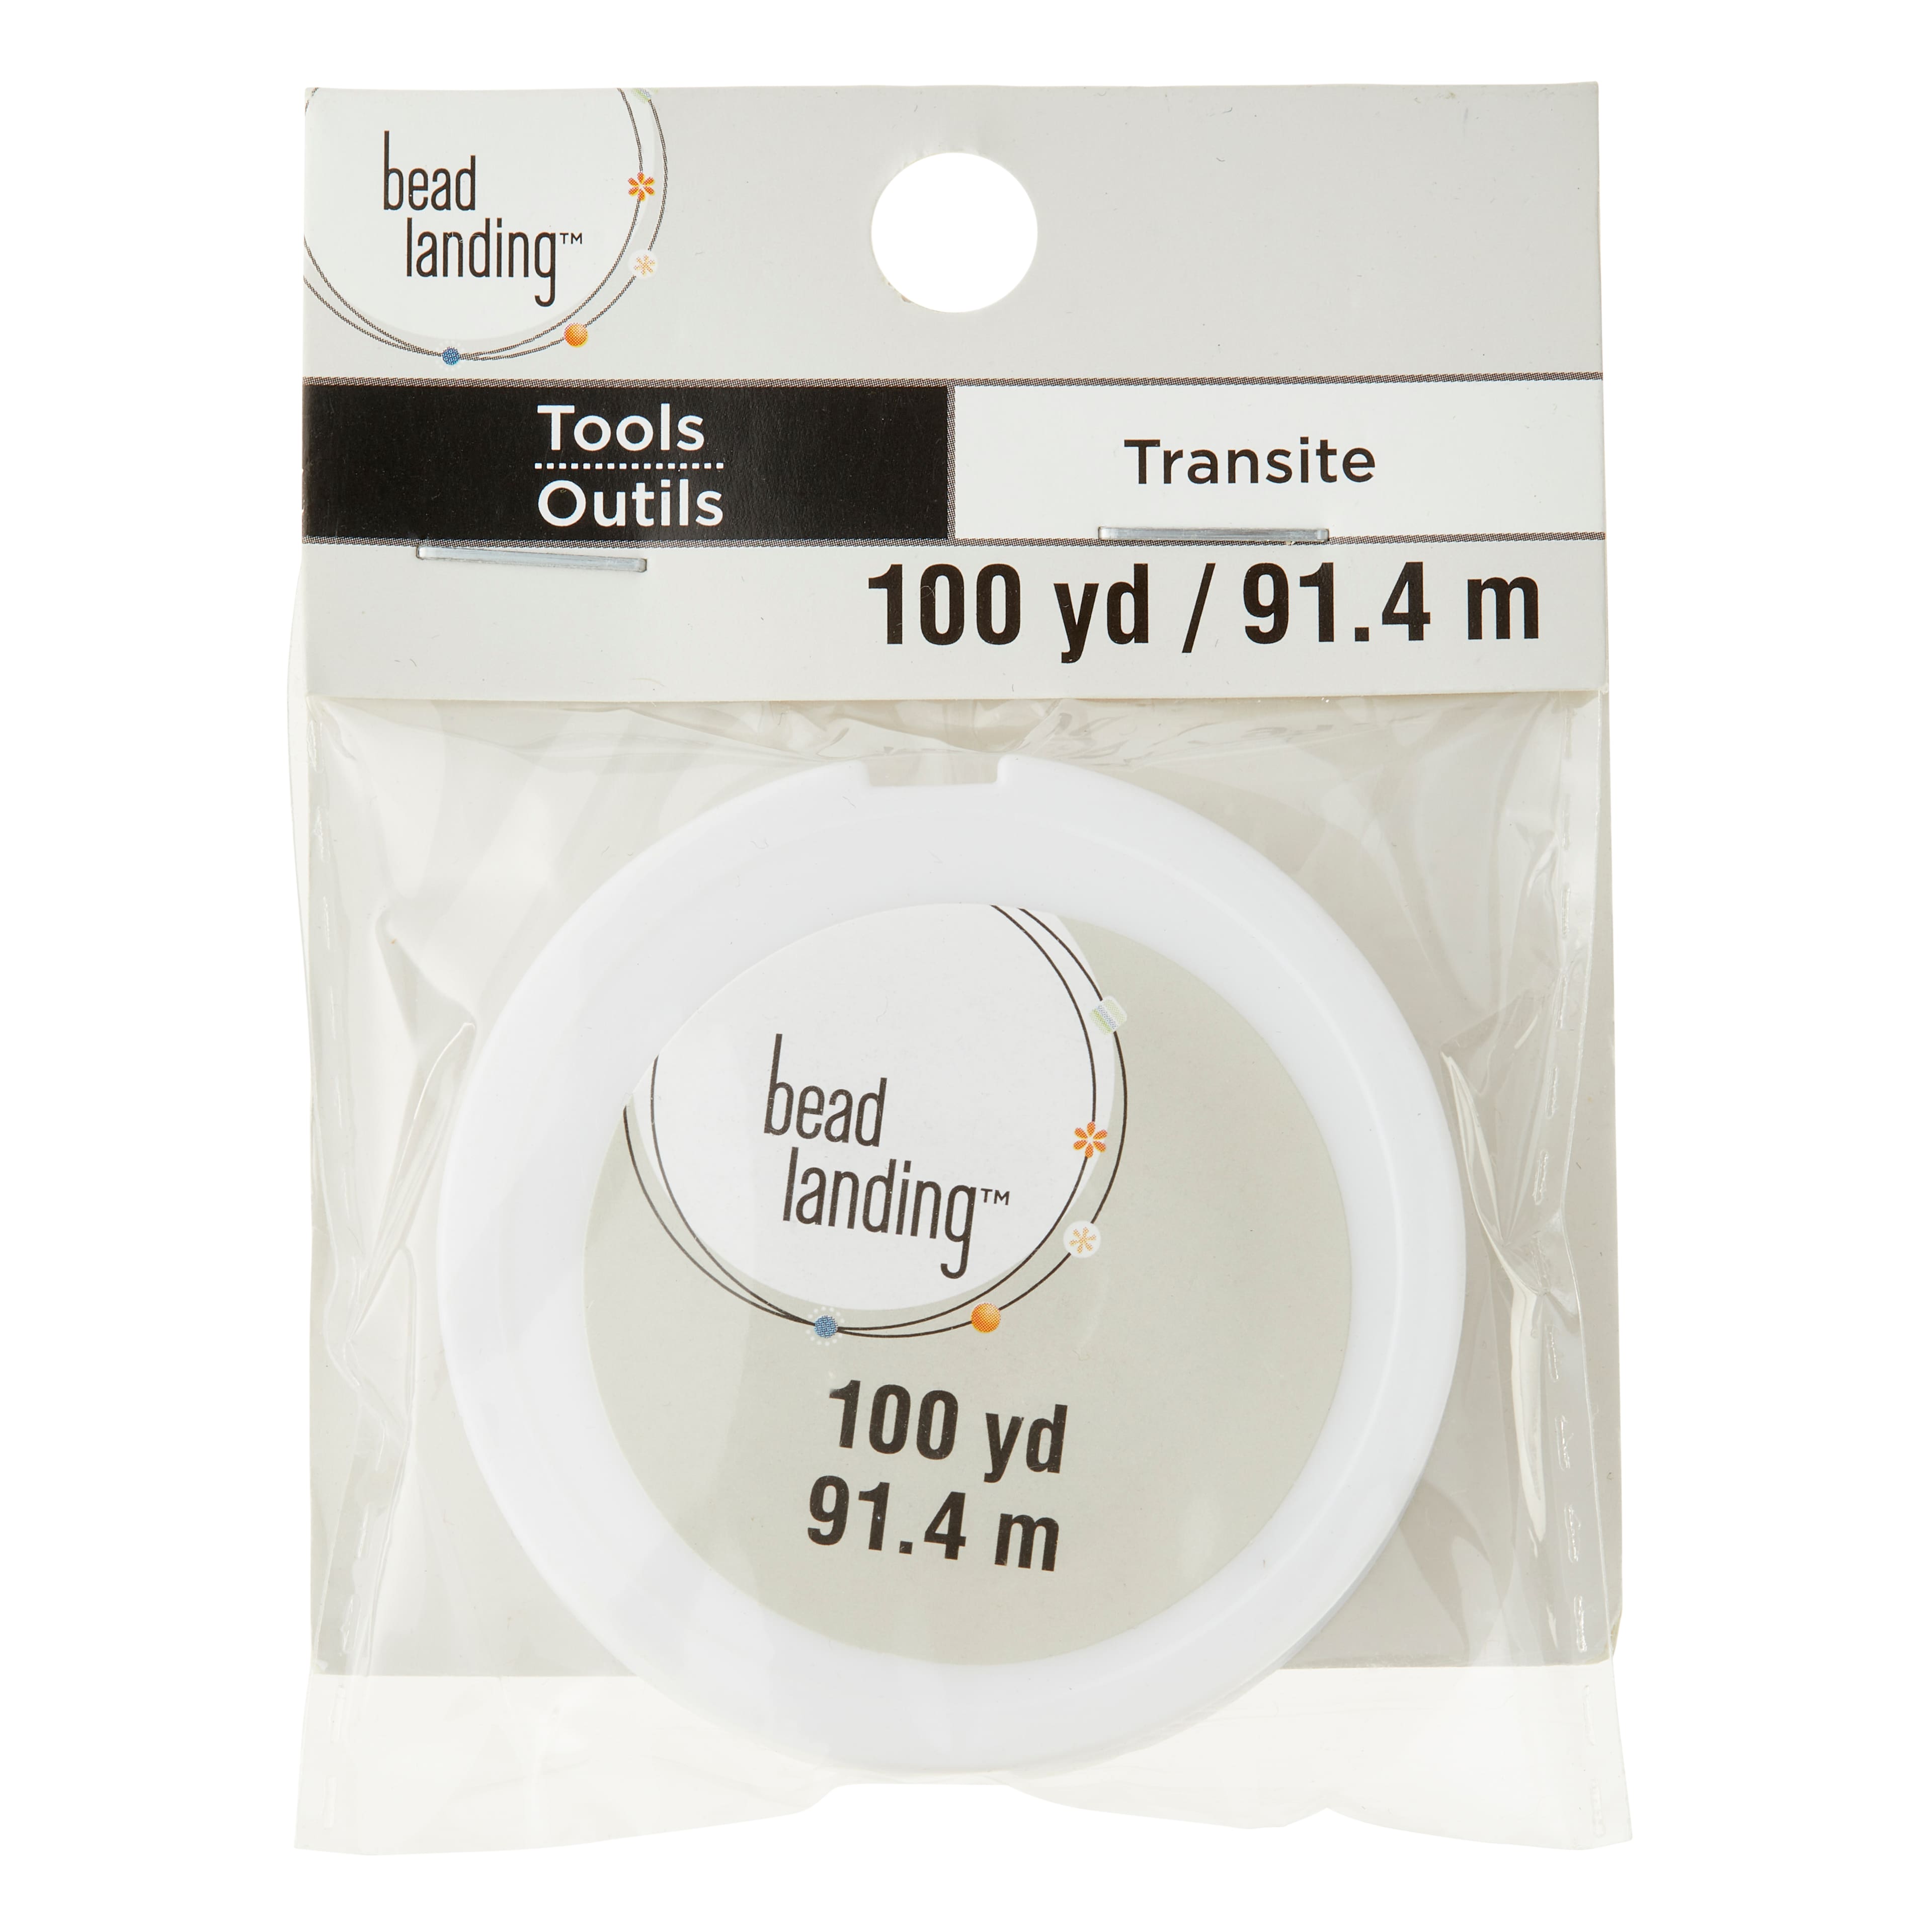 Purchase the Clear Transite by Bead Landing™ at Michaels